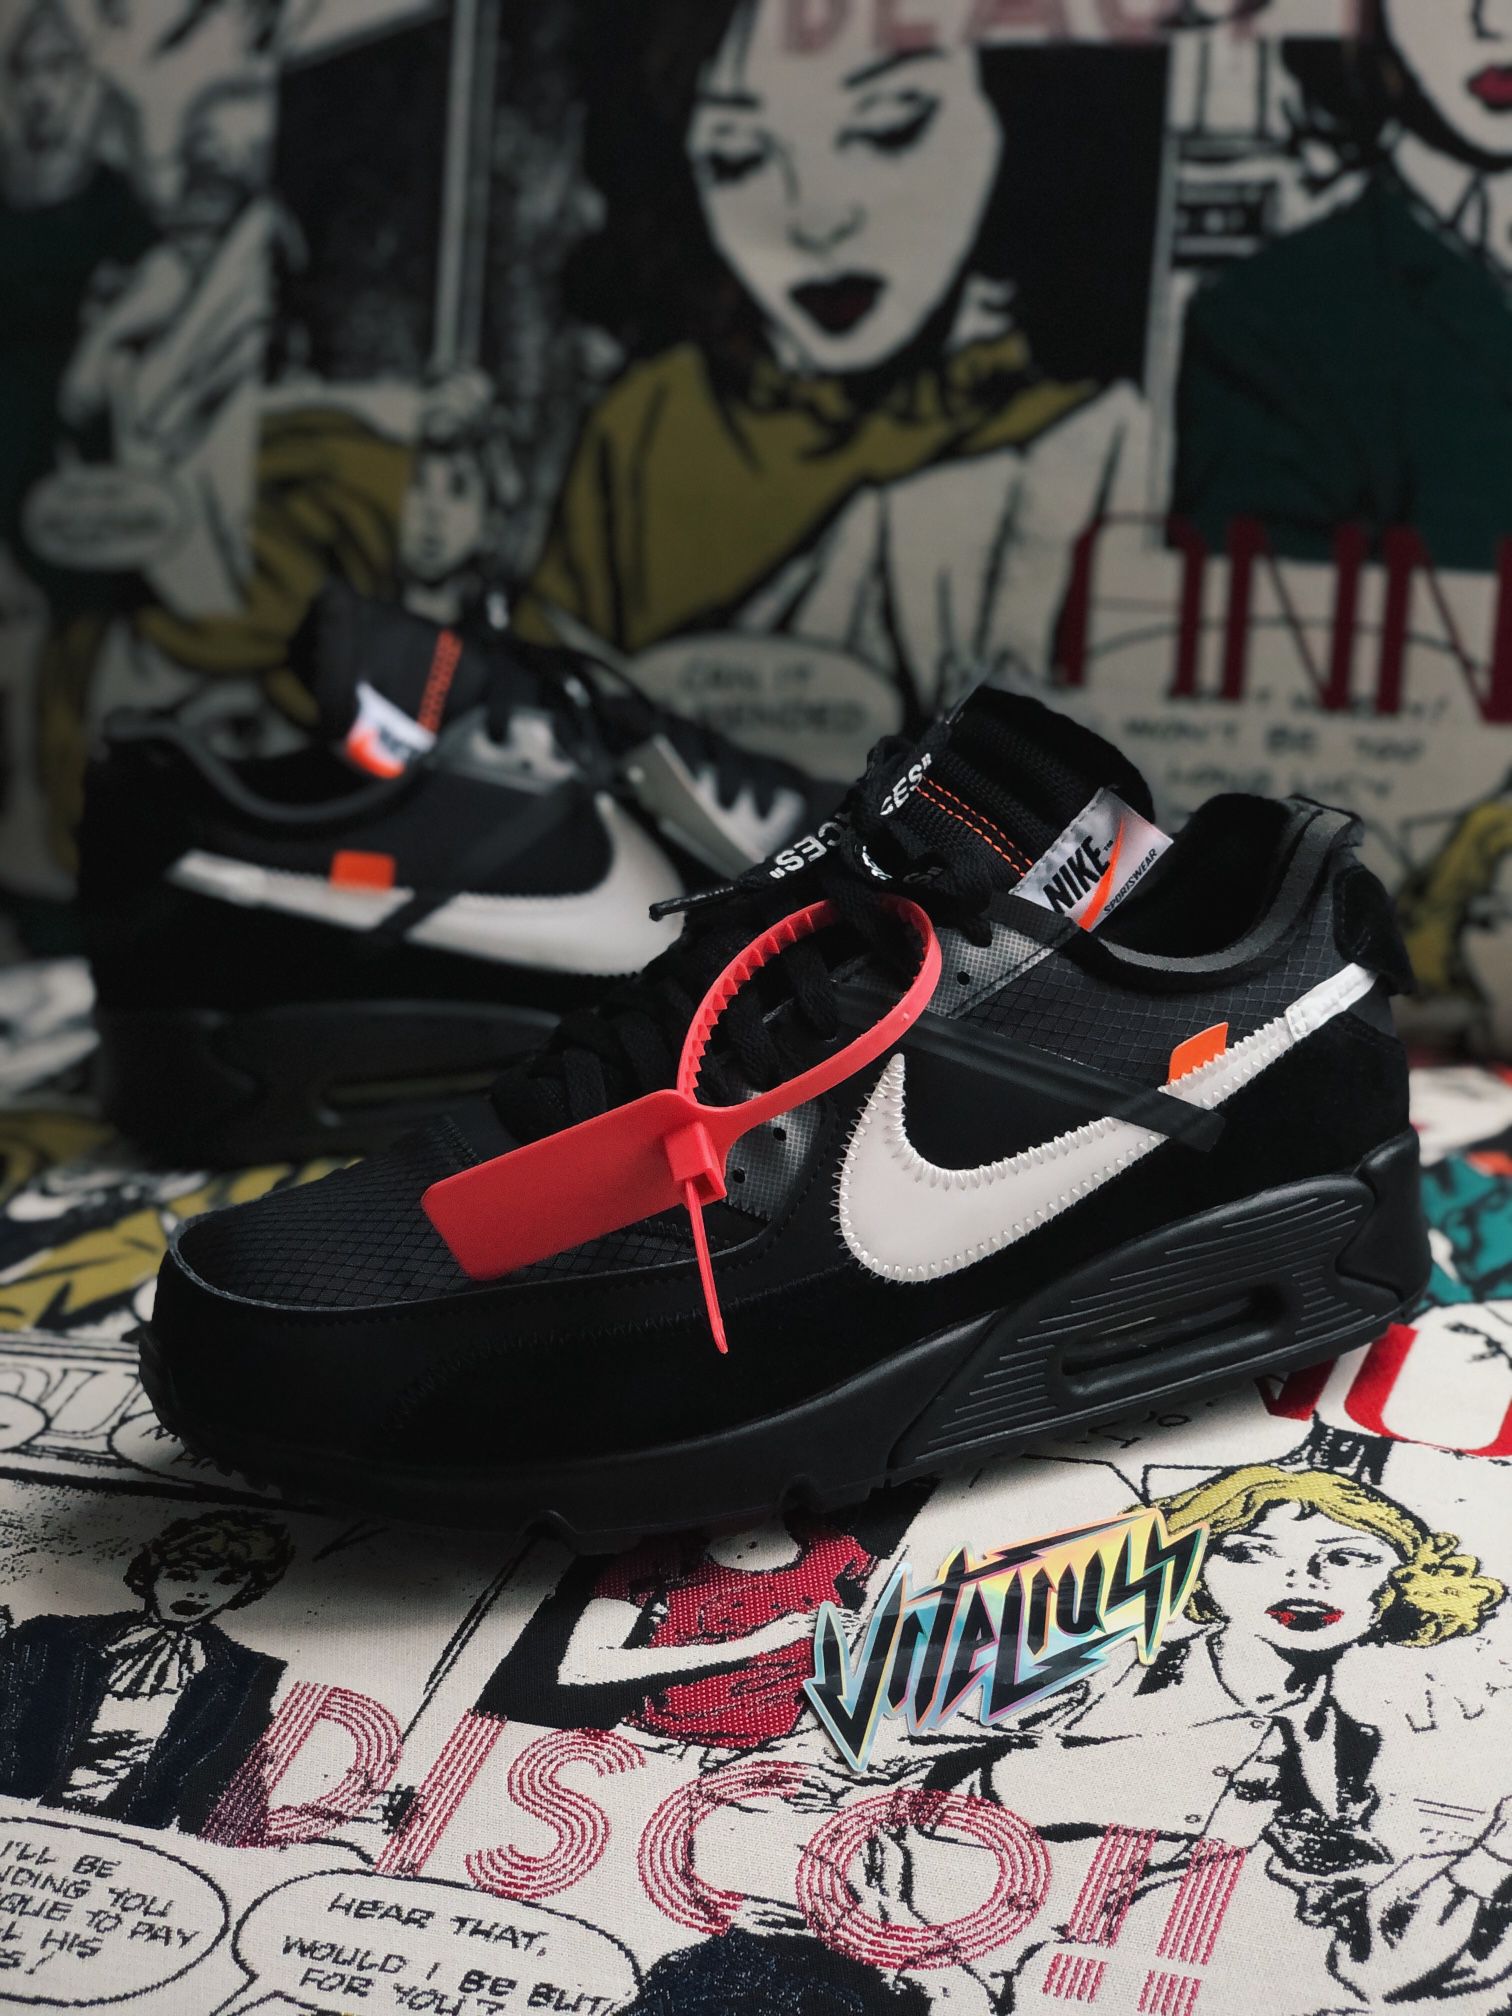 Disco fly lever Nike Air Max 90 Off-White Black for Sale in St. Cloud, FL - OfferUp